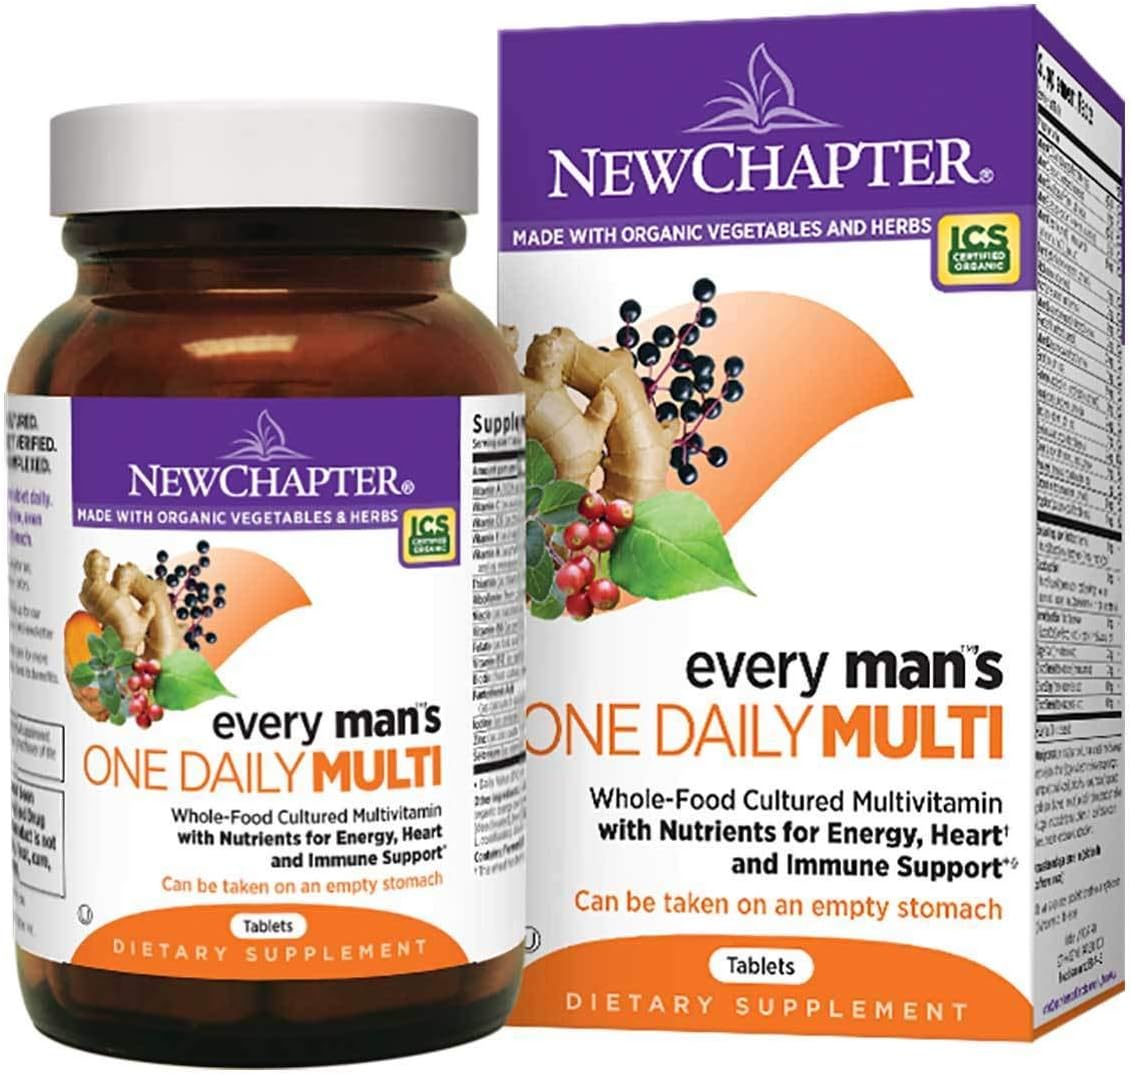 New Chapter Every man's one daily MULTIVITAMINS with Nutrients for Energy, Heart and Immune Support 72 Vegetarian Tablets (Dietary Supplement) (Orange)